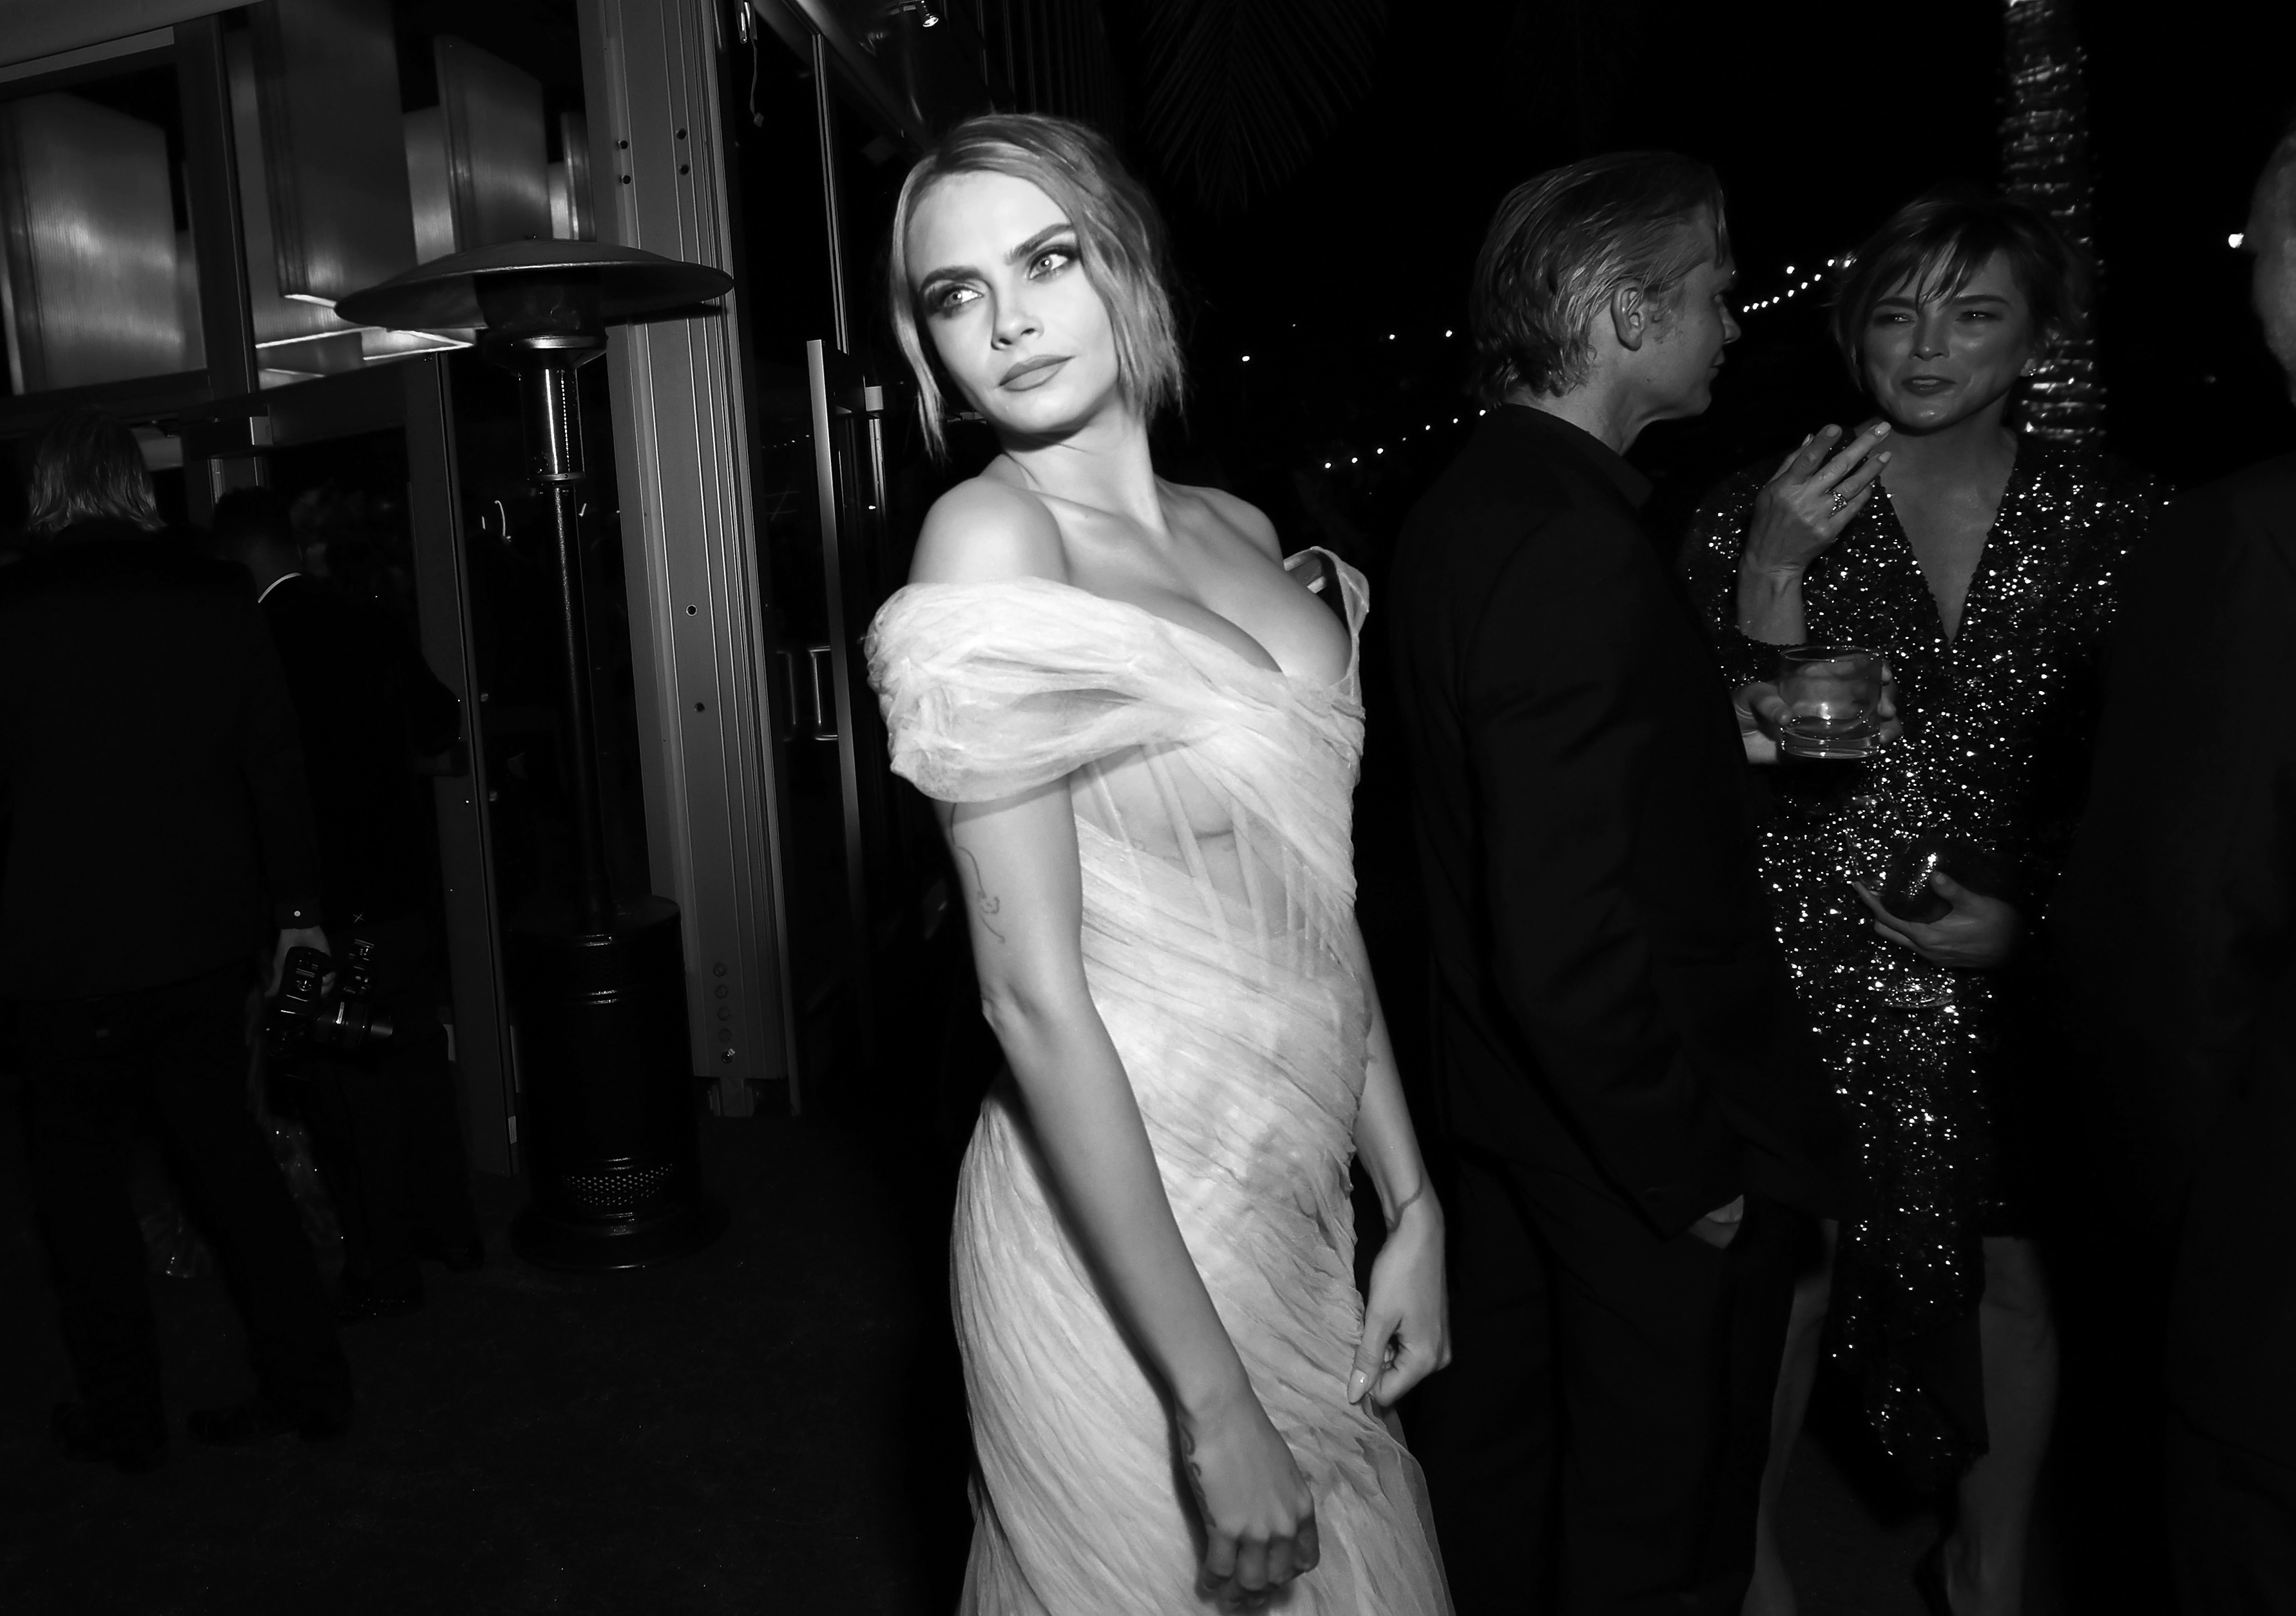 Cara Delevingne is pictured at the 2023 Vanity Fair Oscar Party Hosted By Radhika Jones at Wallis Annenberg Center for the Performing Arts on March 12, 2023, in Beverly Hills, California | Source: Getty images